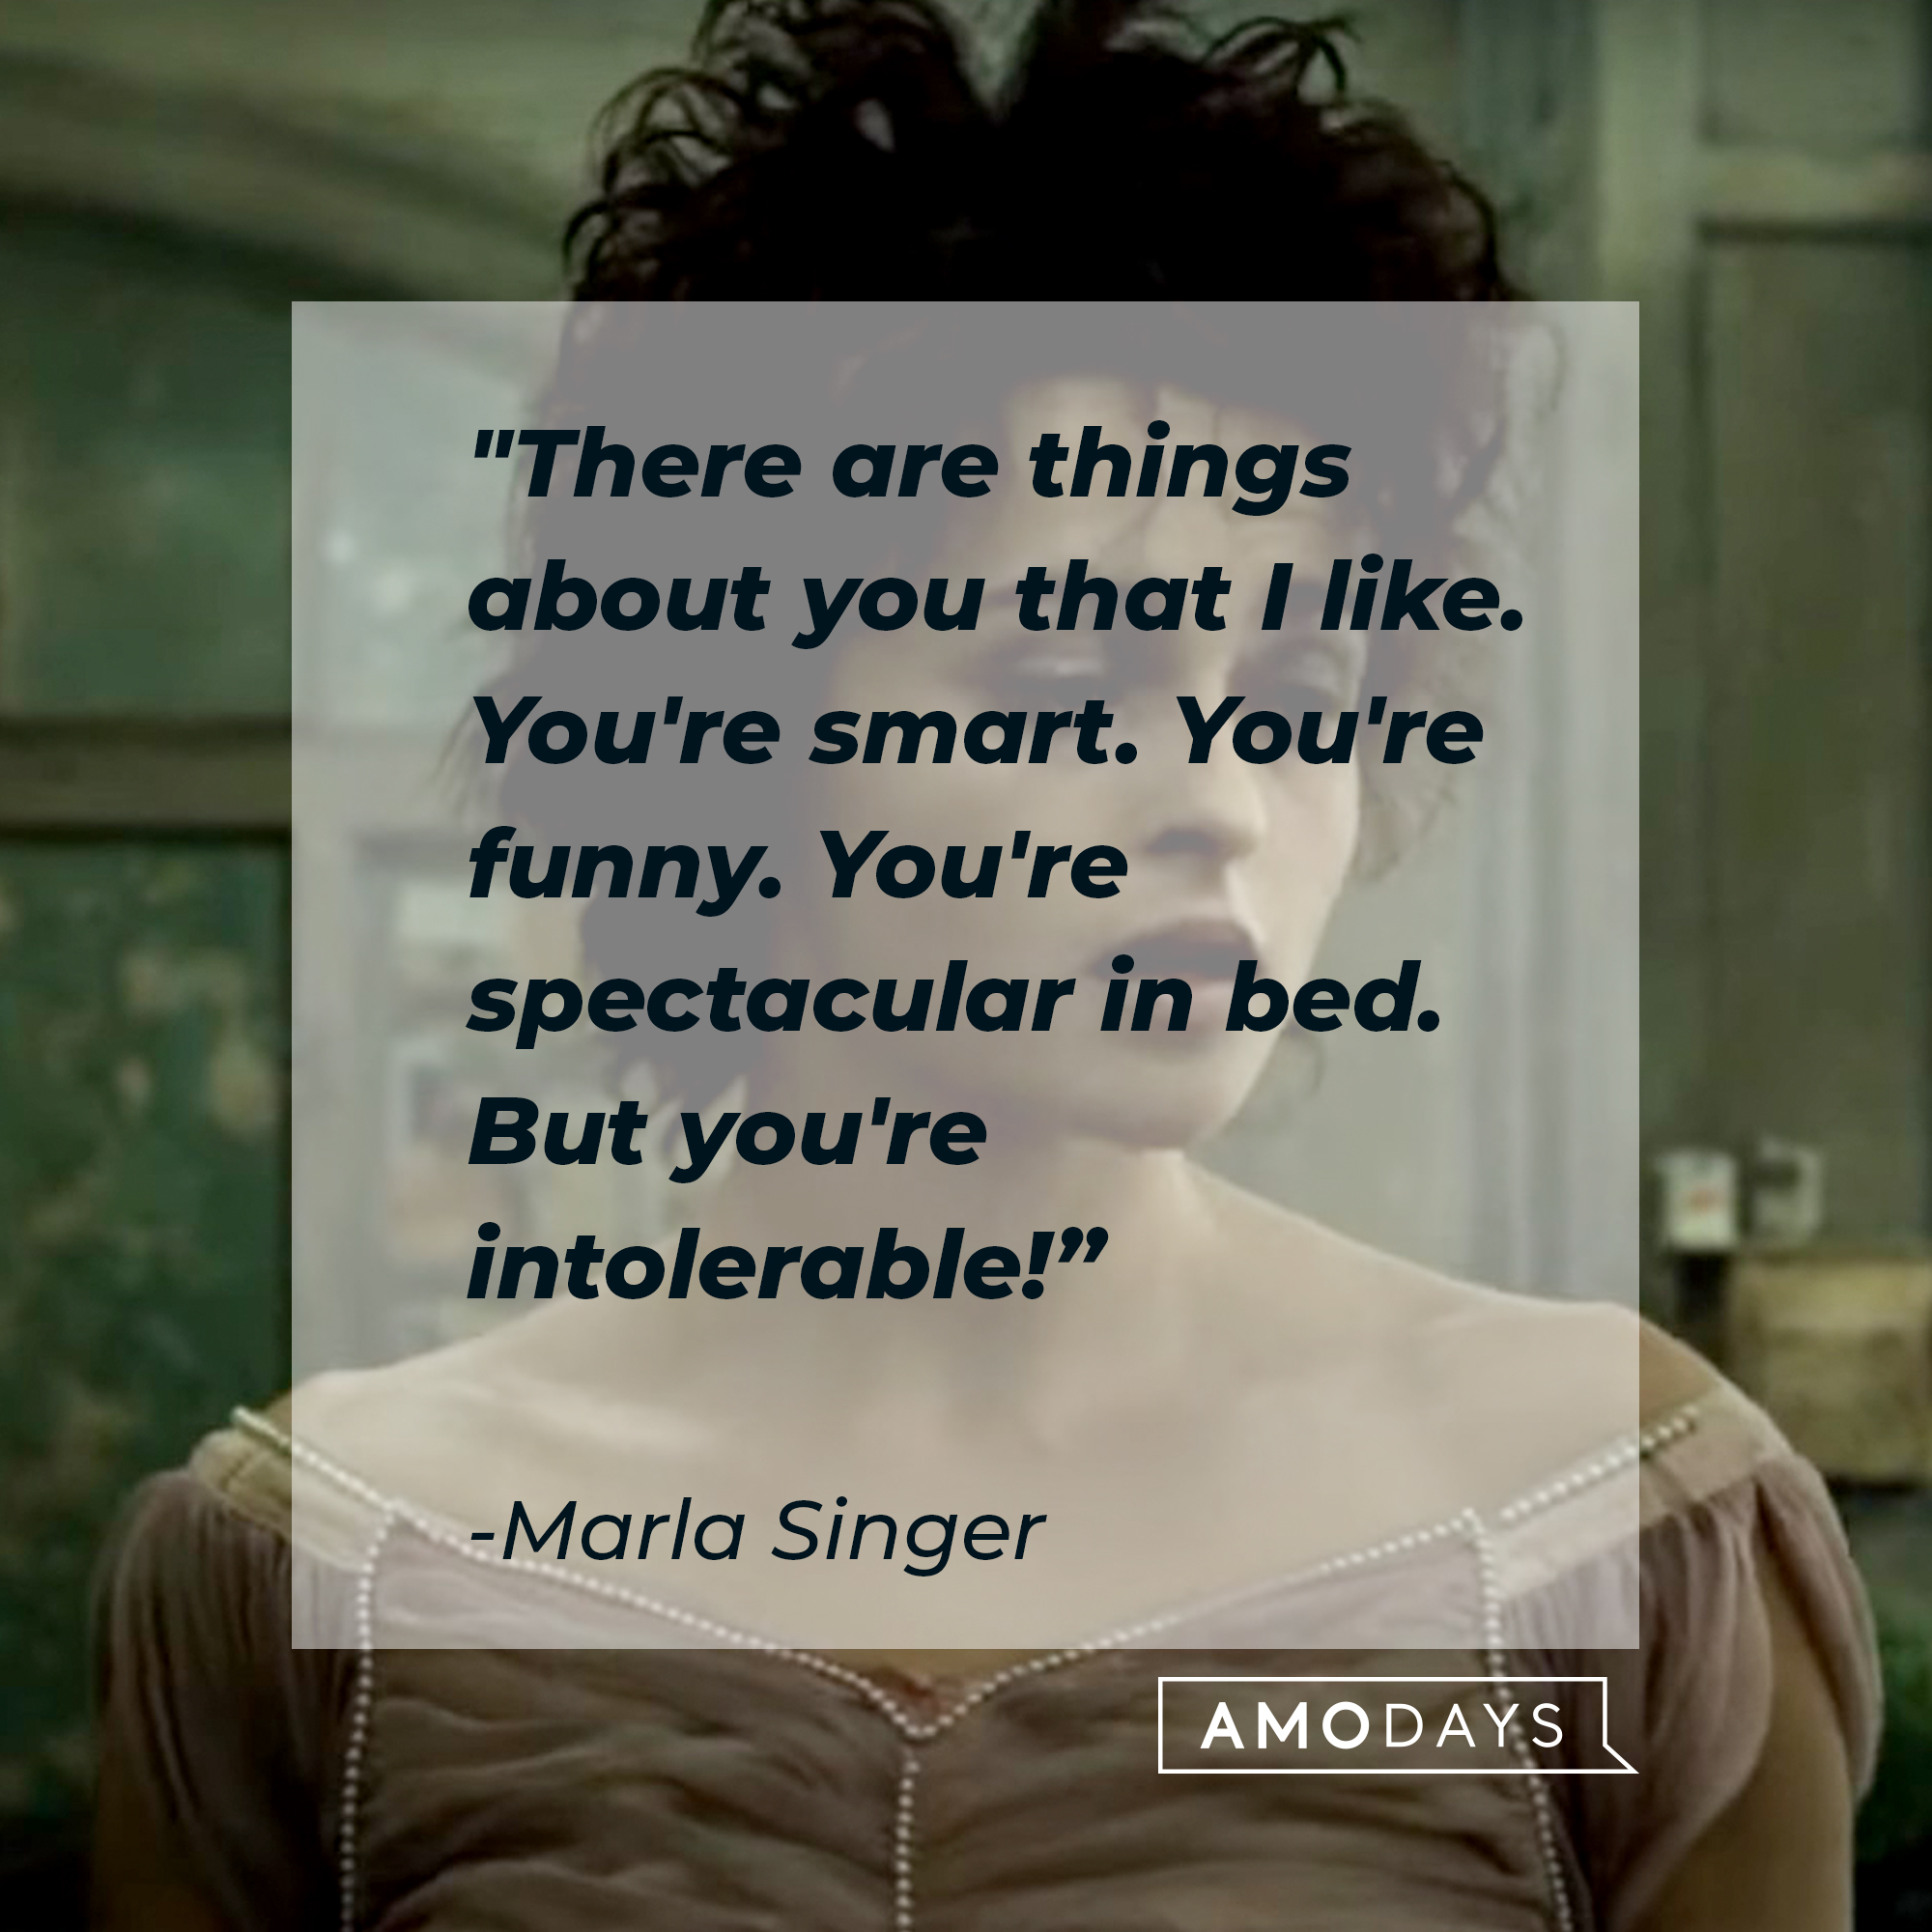 An image of Marla Singer with her quote: "There are things about you that I like. You're smart. You're funny. You're spectacular in bed. But you're intolerable!” | Image: facebook.com/FightClub